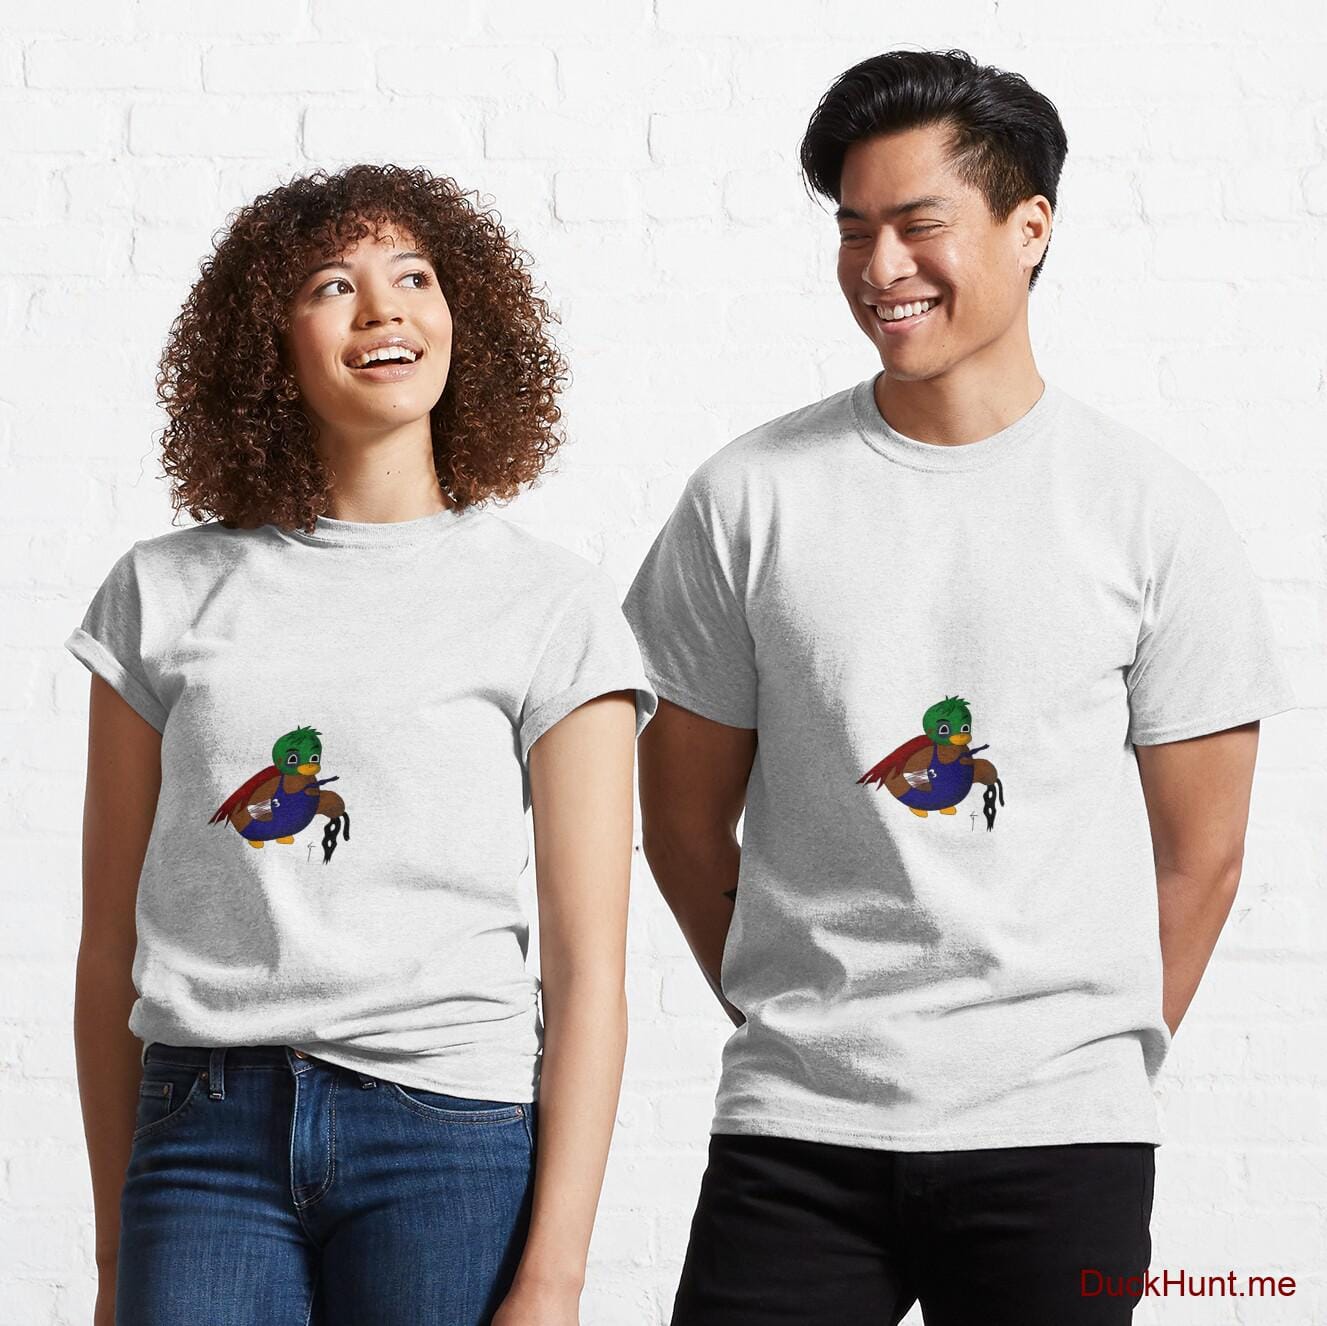 Dead DuckHunt Boss (smokeless) White Classic T-Shirt (Front printed)